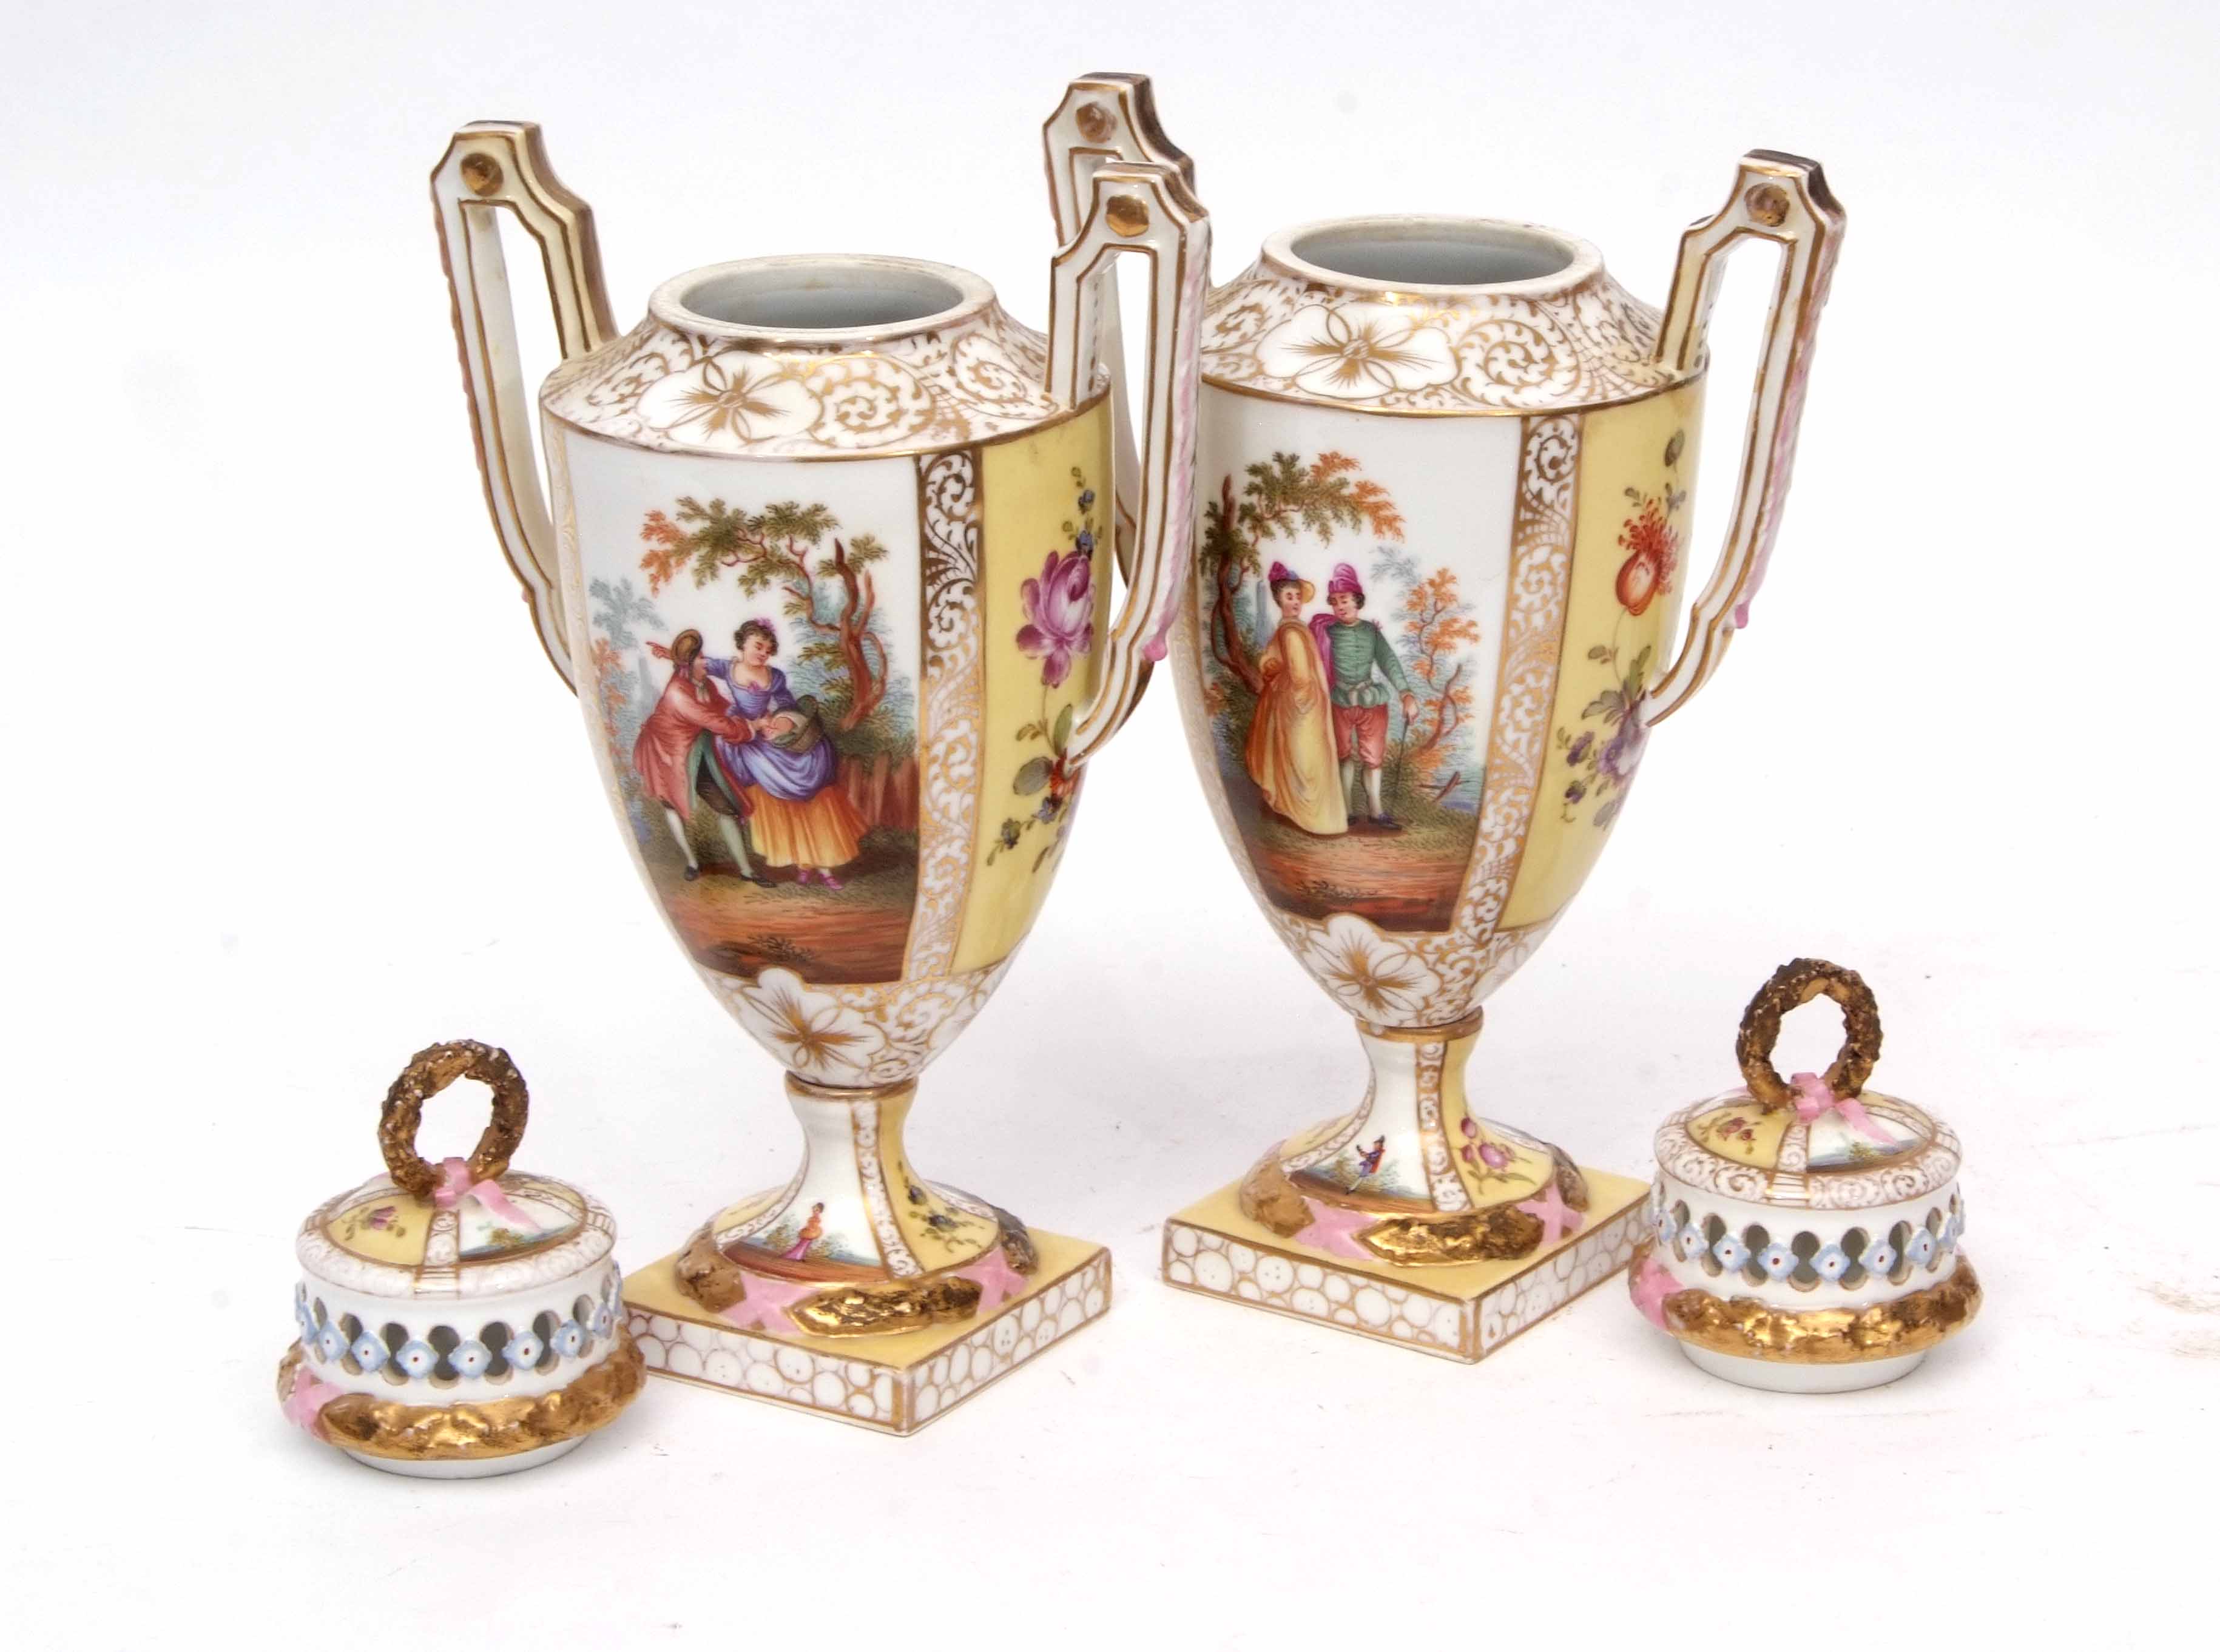 Pair of Continental porcelain vases decorated in Meissen style with figures in a landscape with - Image 5 of 6